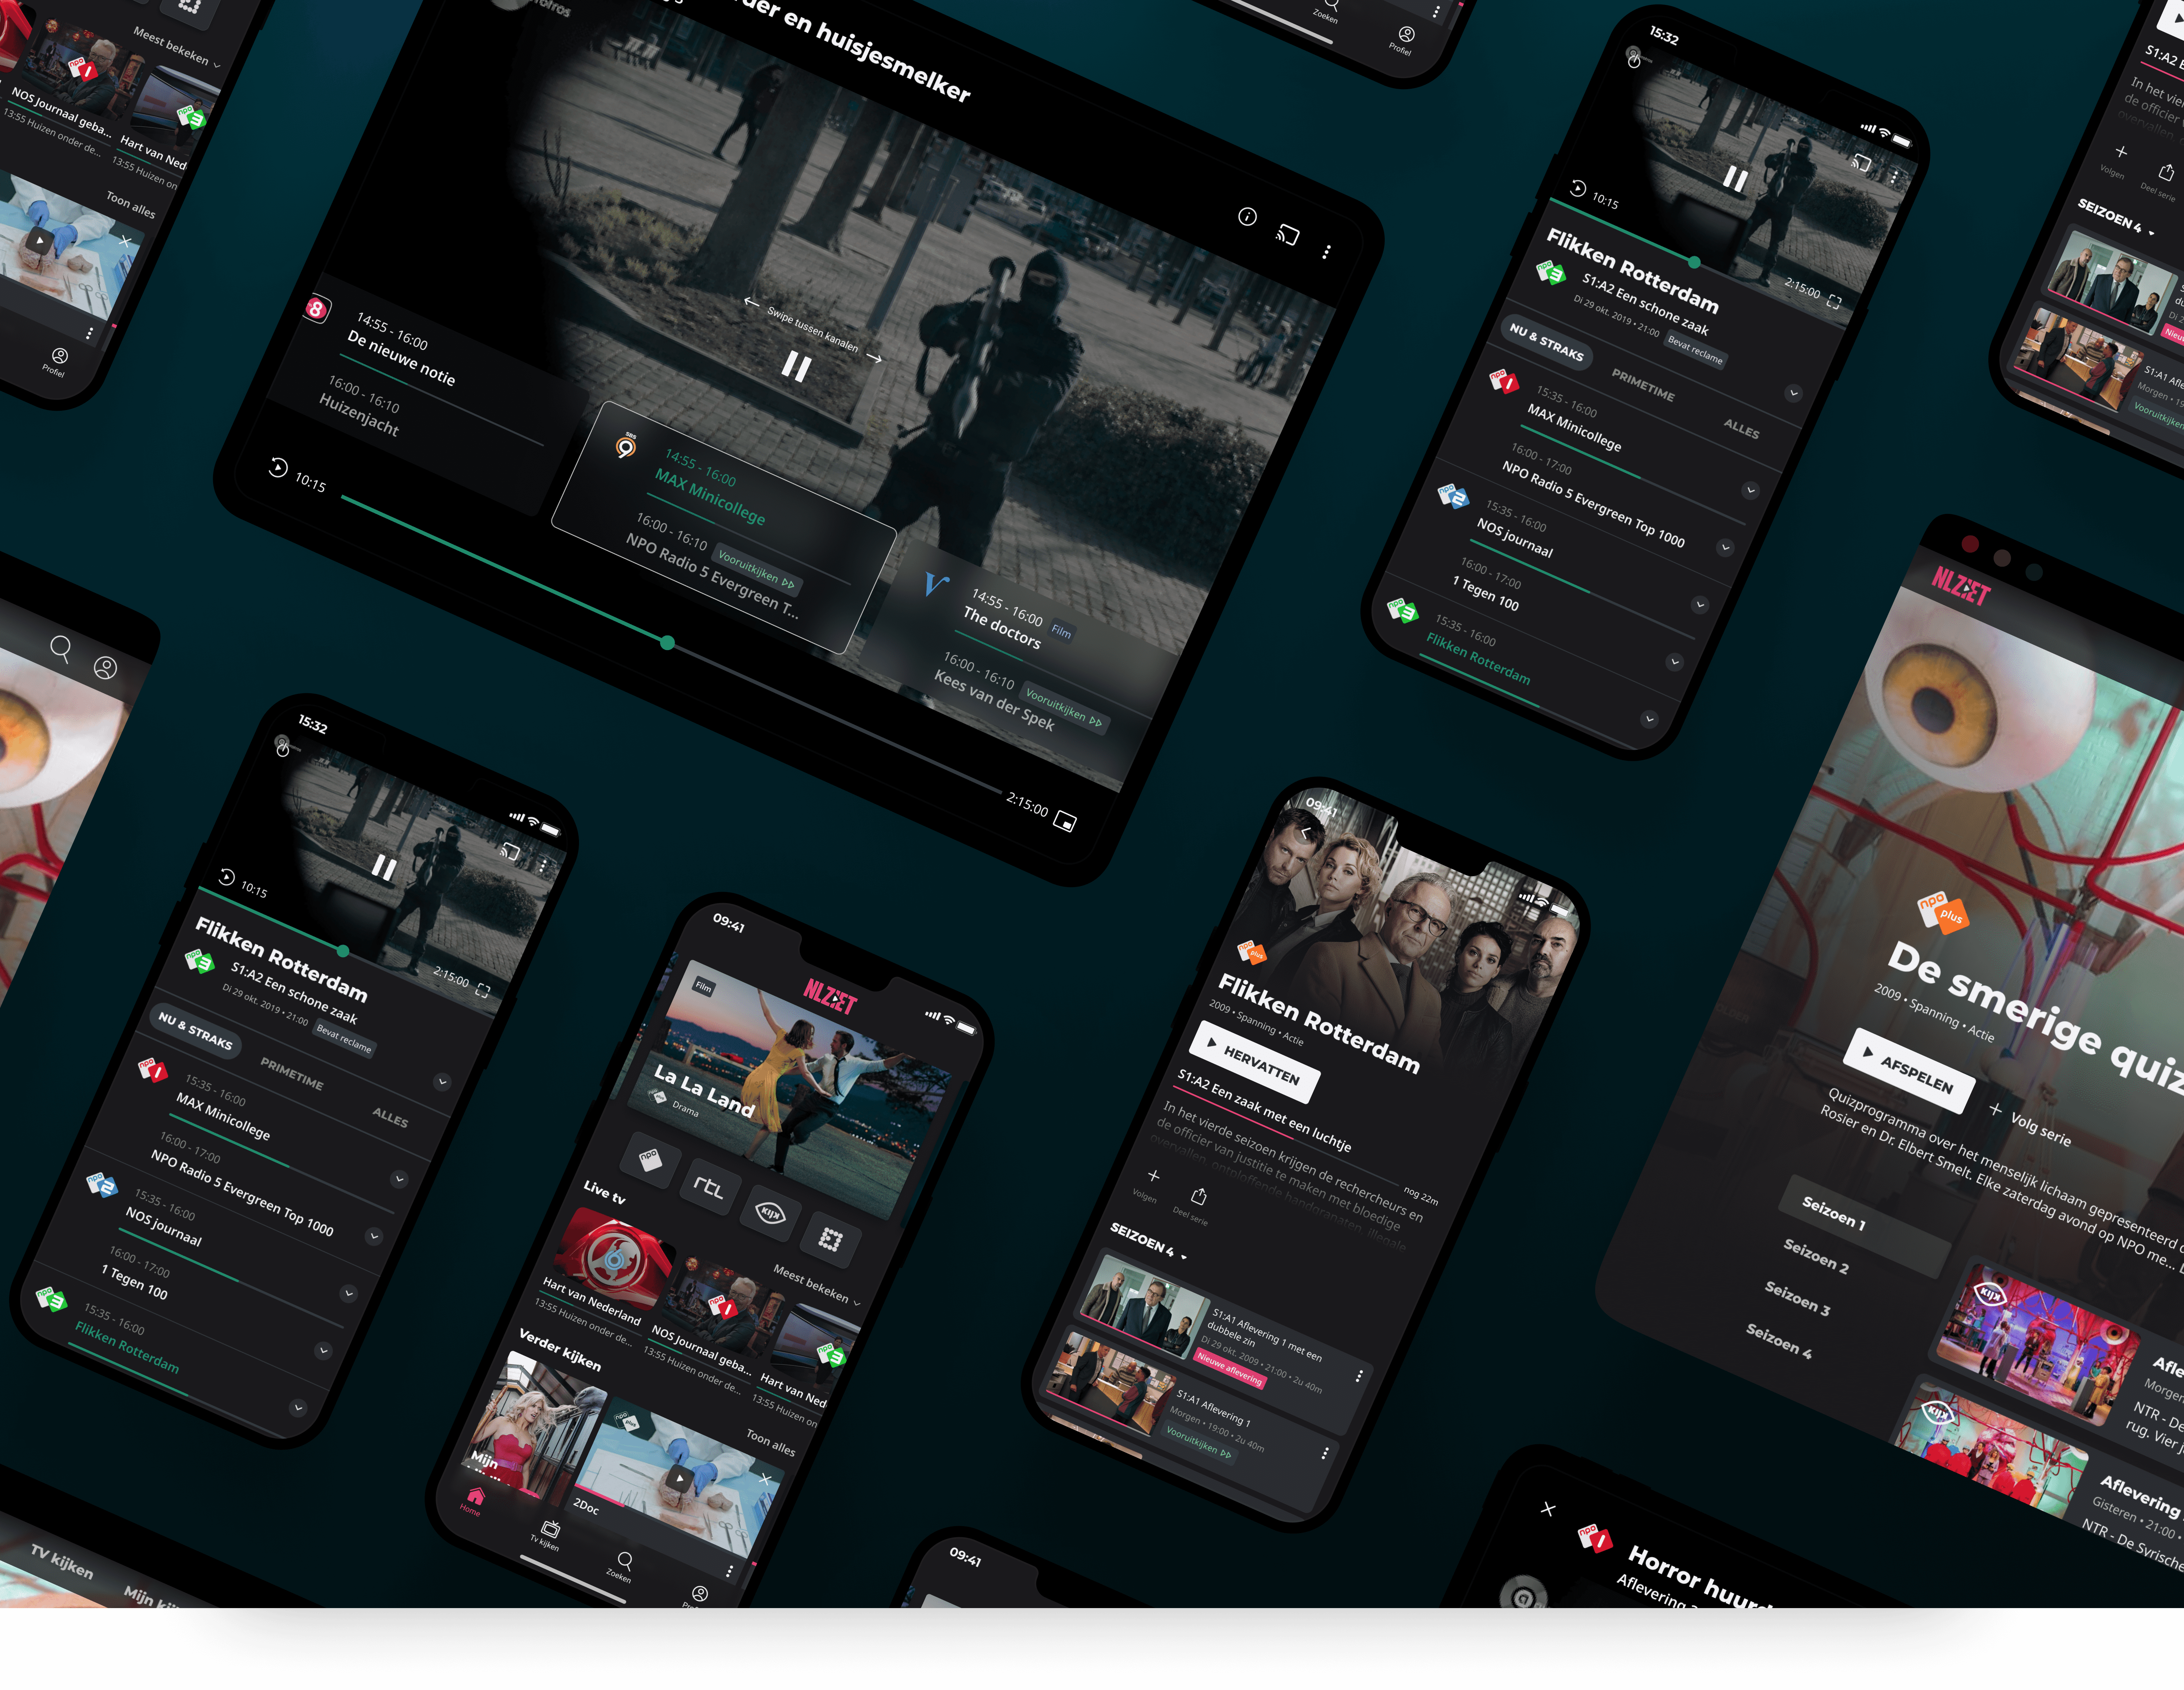 A new concept and design for app and desktop